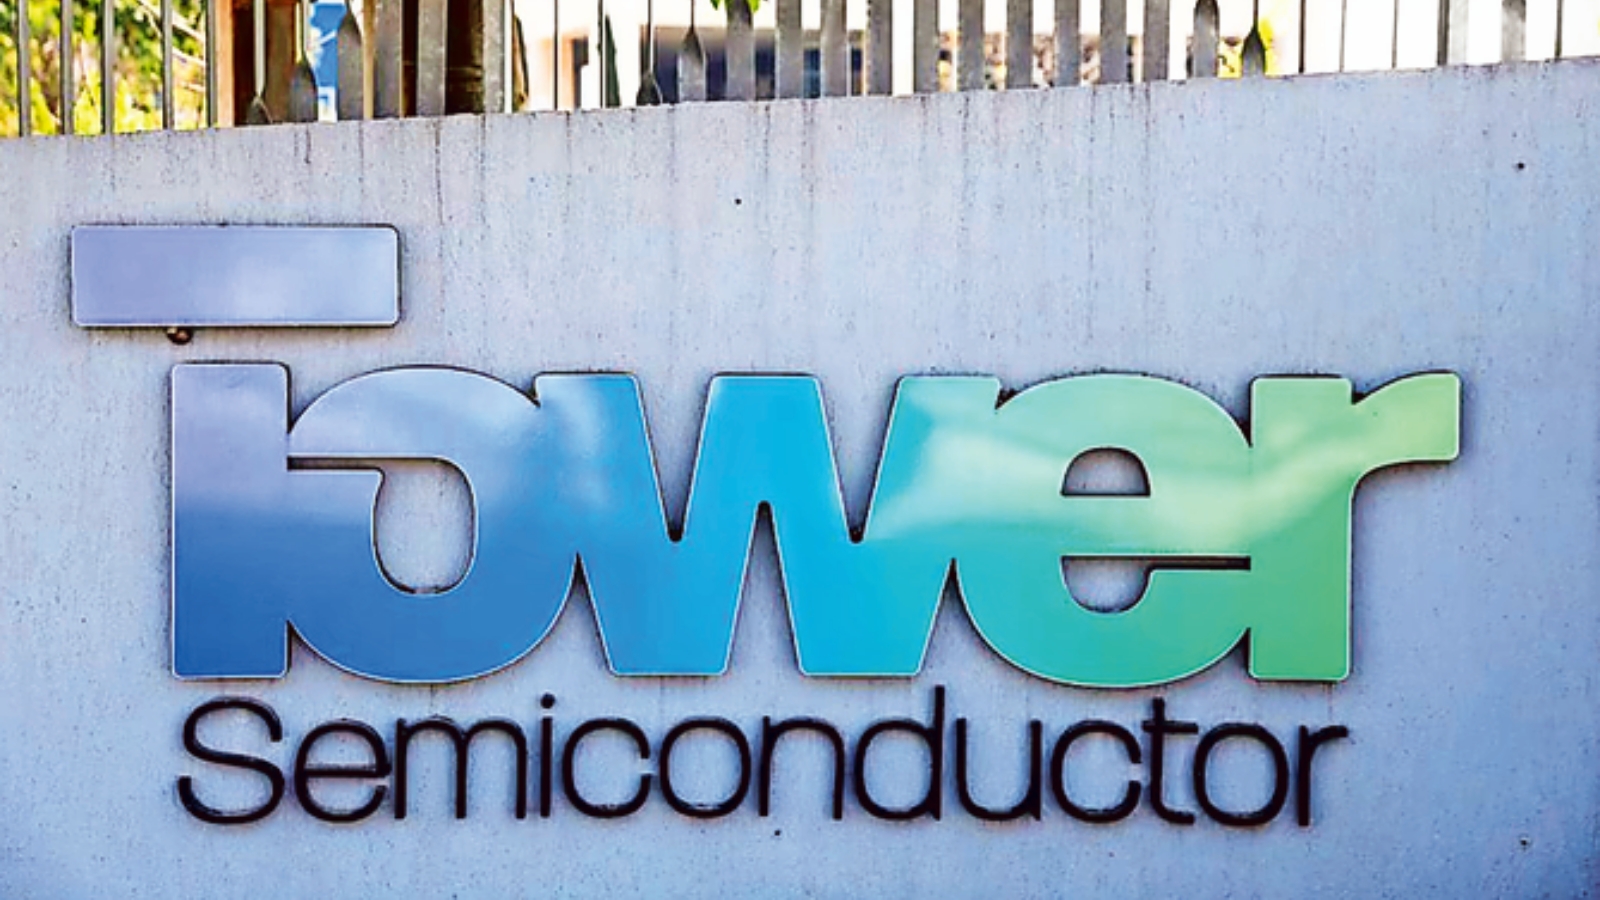 android, israeli chipmaker tower closes in on $8 billion fabrication plant in india